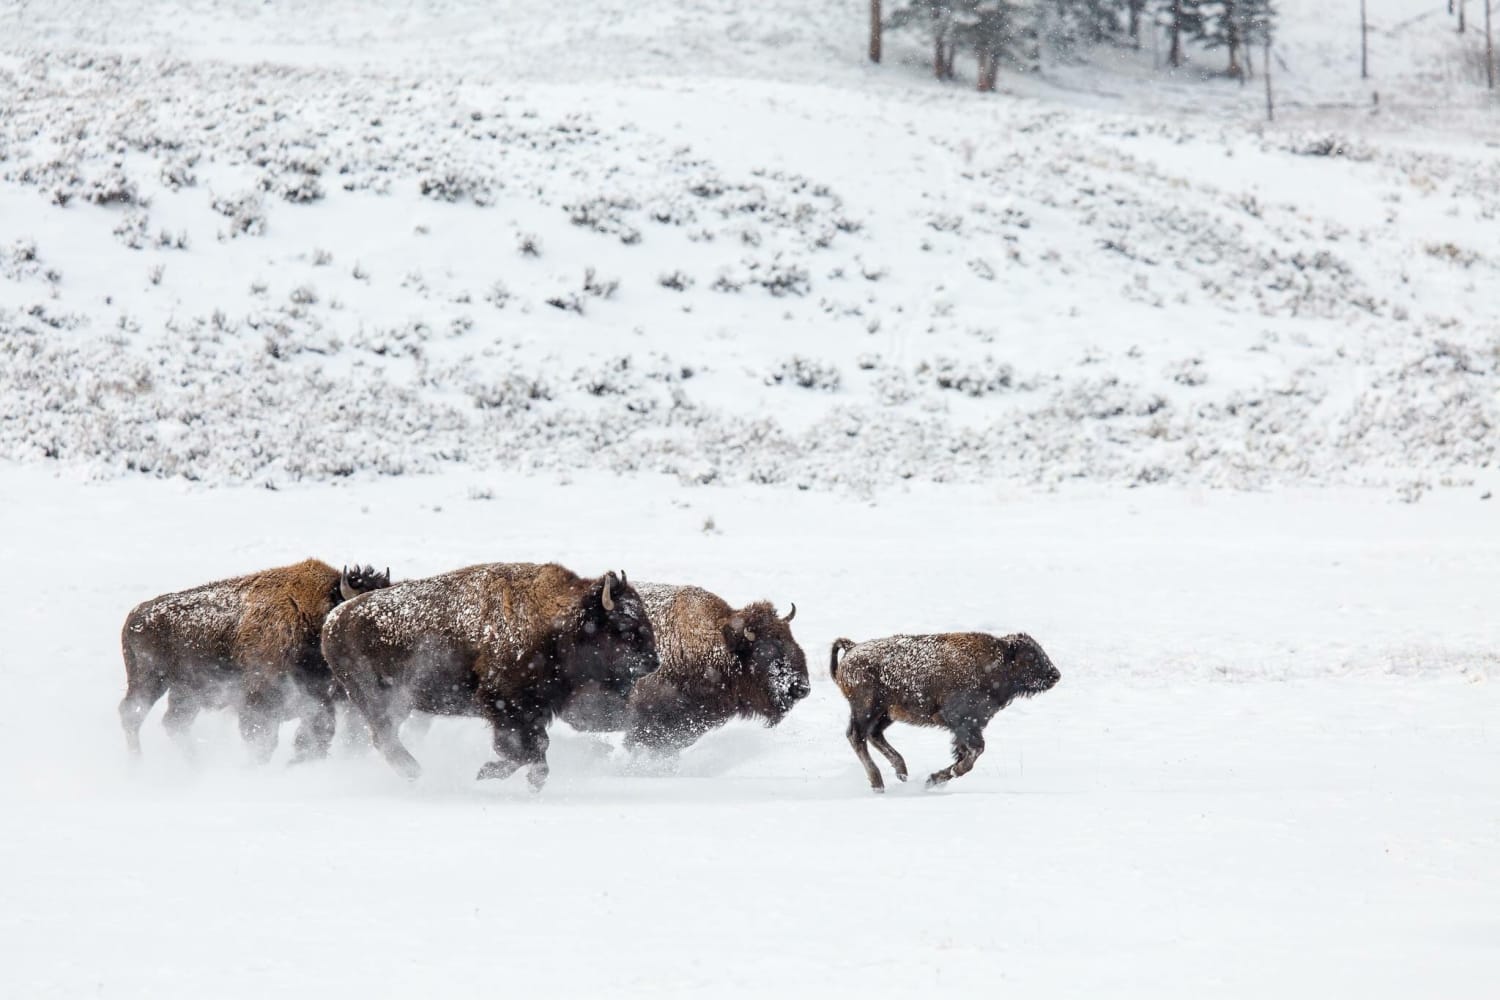 Thumpety thump thump, thumpety thump thump...Look at bison go. Remember to treat wildlife with proper caution and respect. Learn more tips at https://t.co/IoXAO5iykr Image: Bison on the move in the Lamar Valley at Yellowstone National Park/ Neal Herbert FindYourPark ❄️